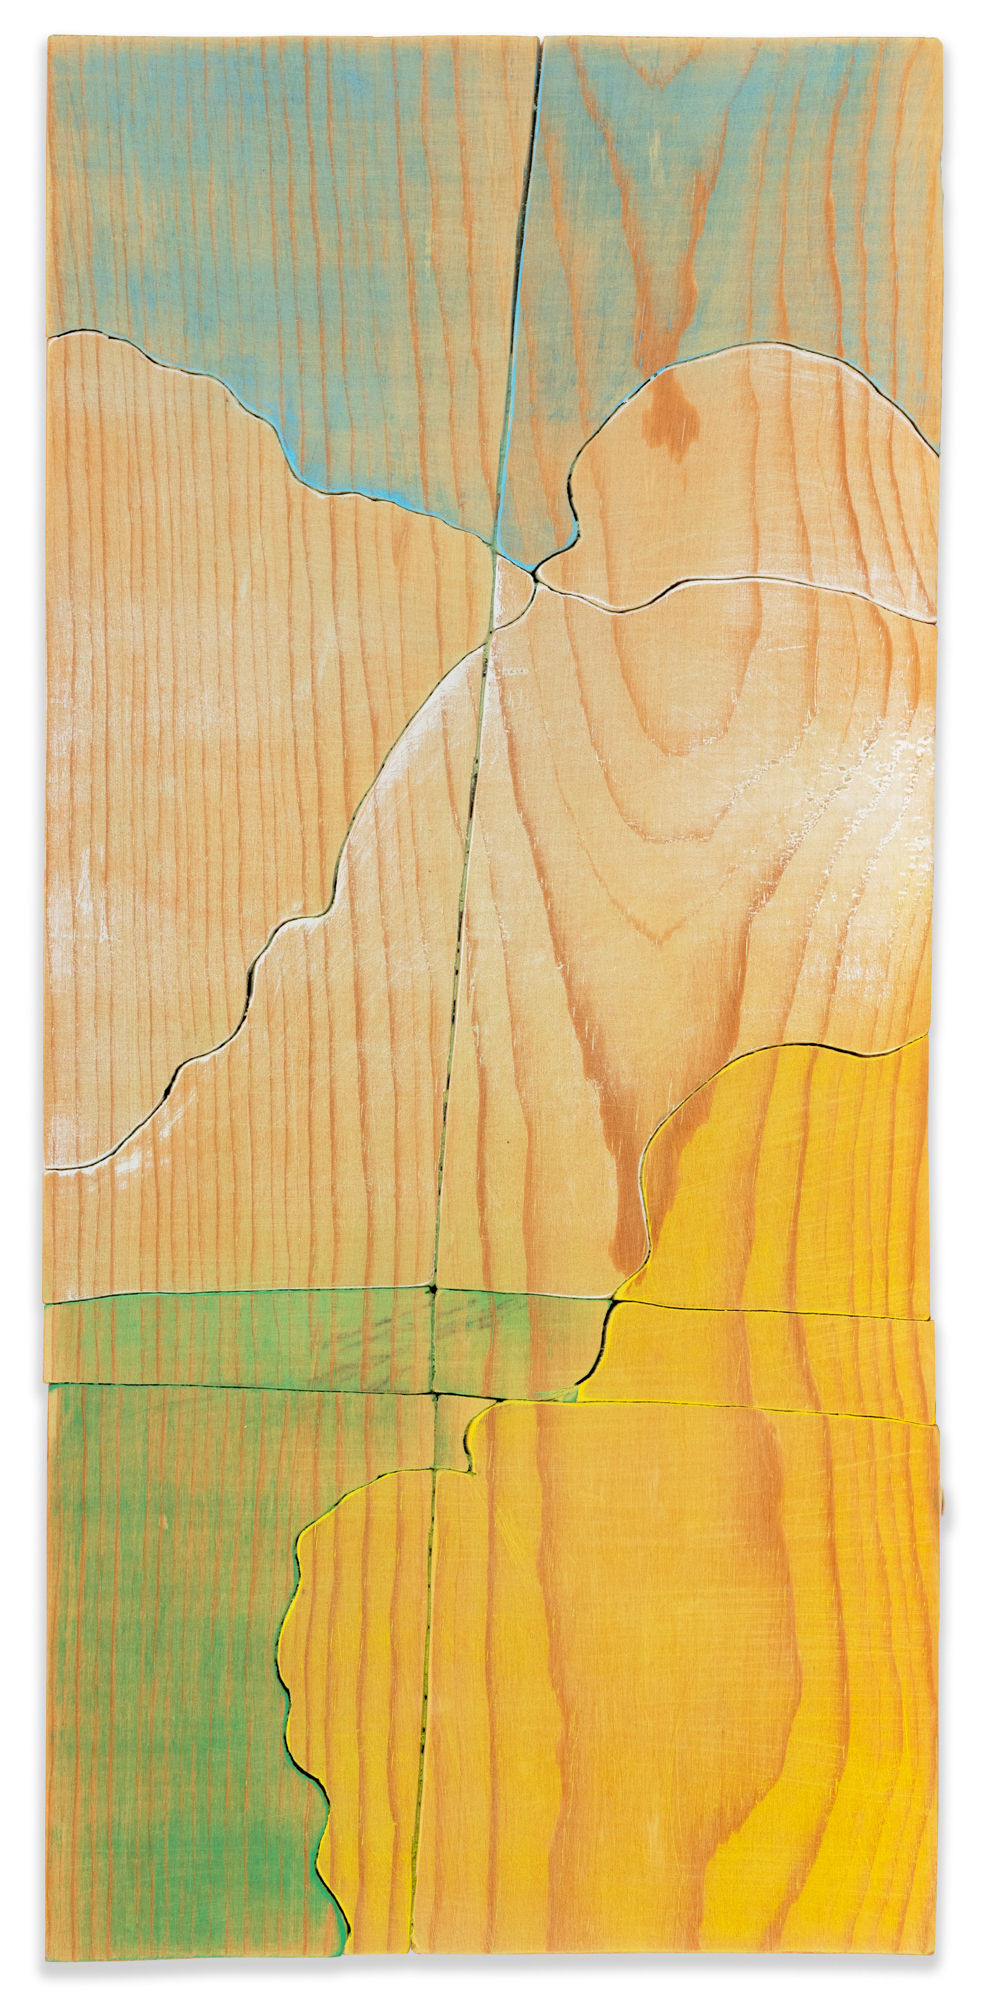 Color image of wooden sculpture with etchings and swatches of green, yellow, white, and blue